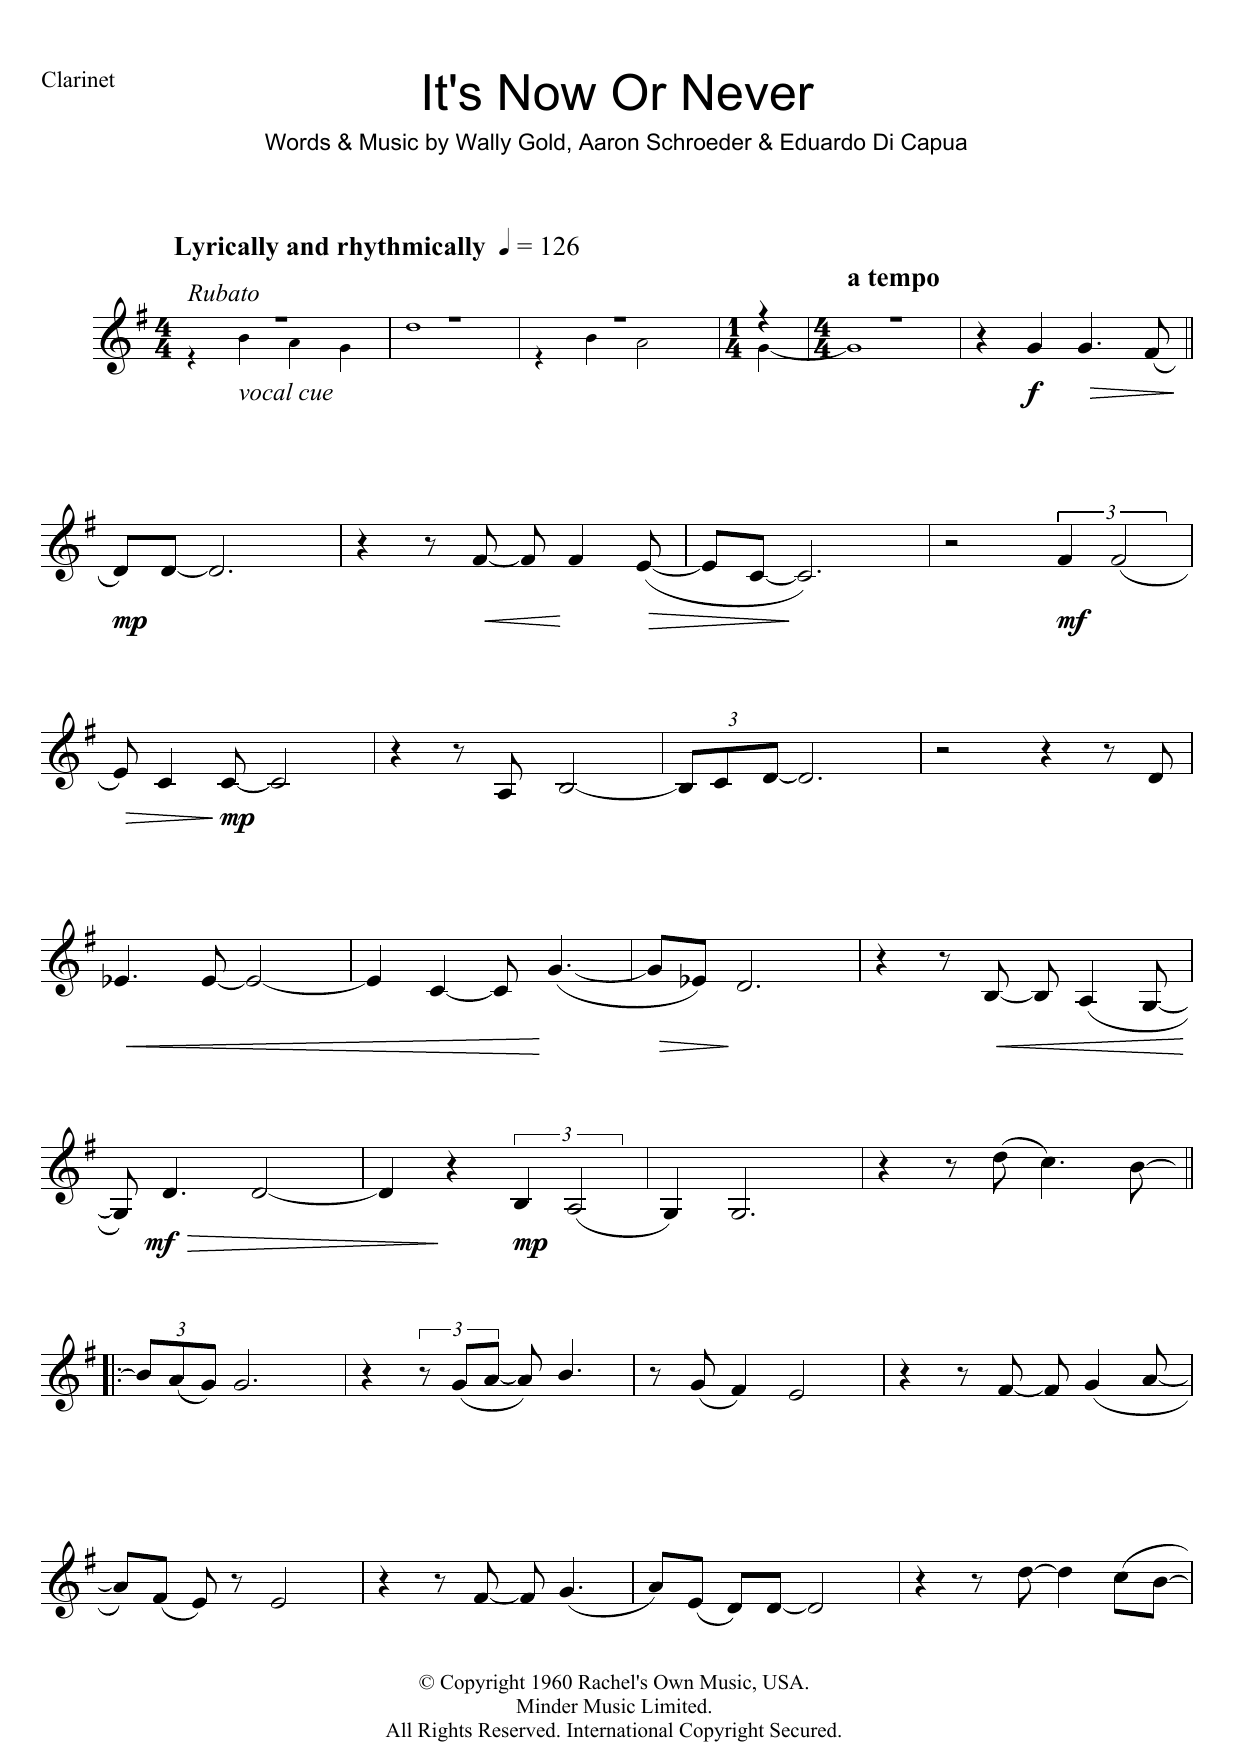 Download Elvis Presley It's Now Or Never Sheet Music